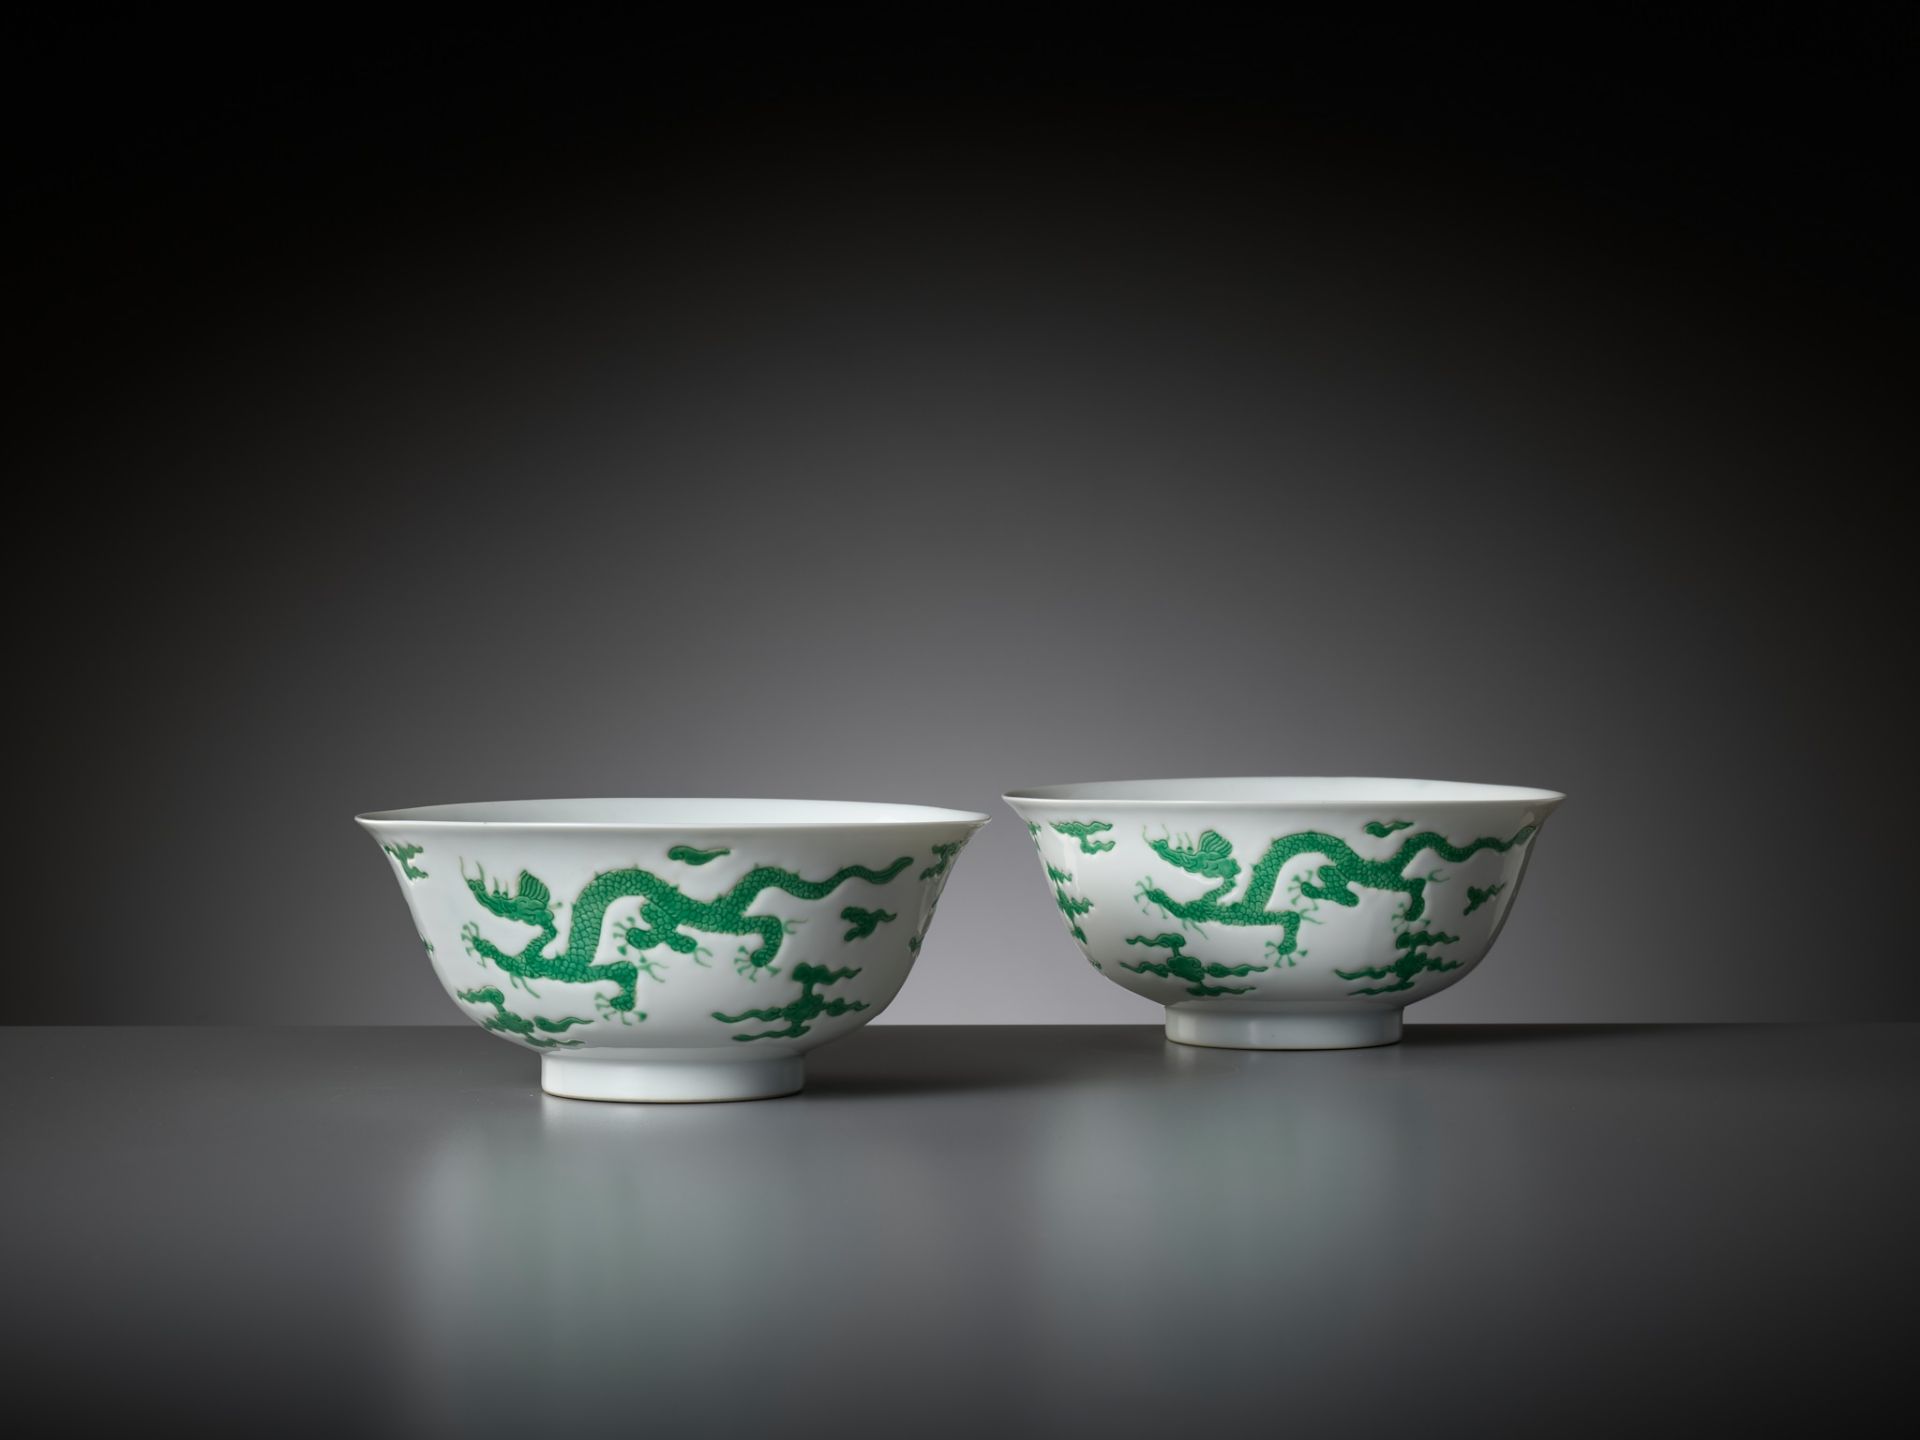 A RARE PAIR OF MING-STYLE GREEN-ENAMELED 'DRAGON' BOWLS, KANGXI PERIOD - Image 6 of 18